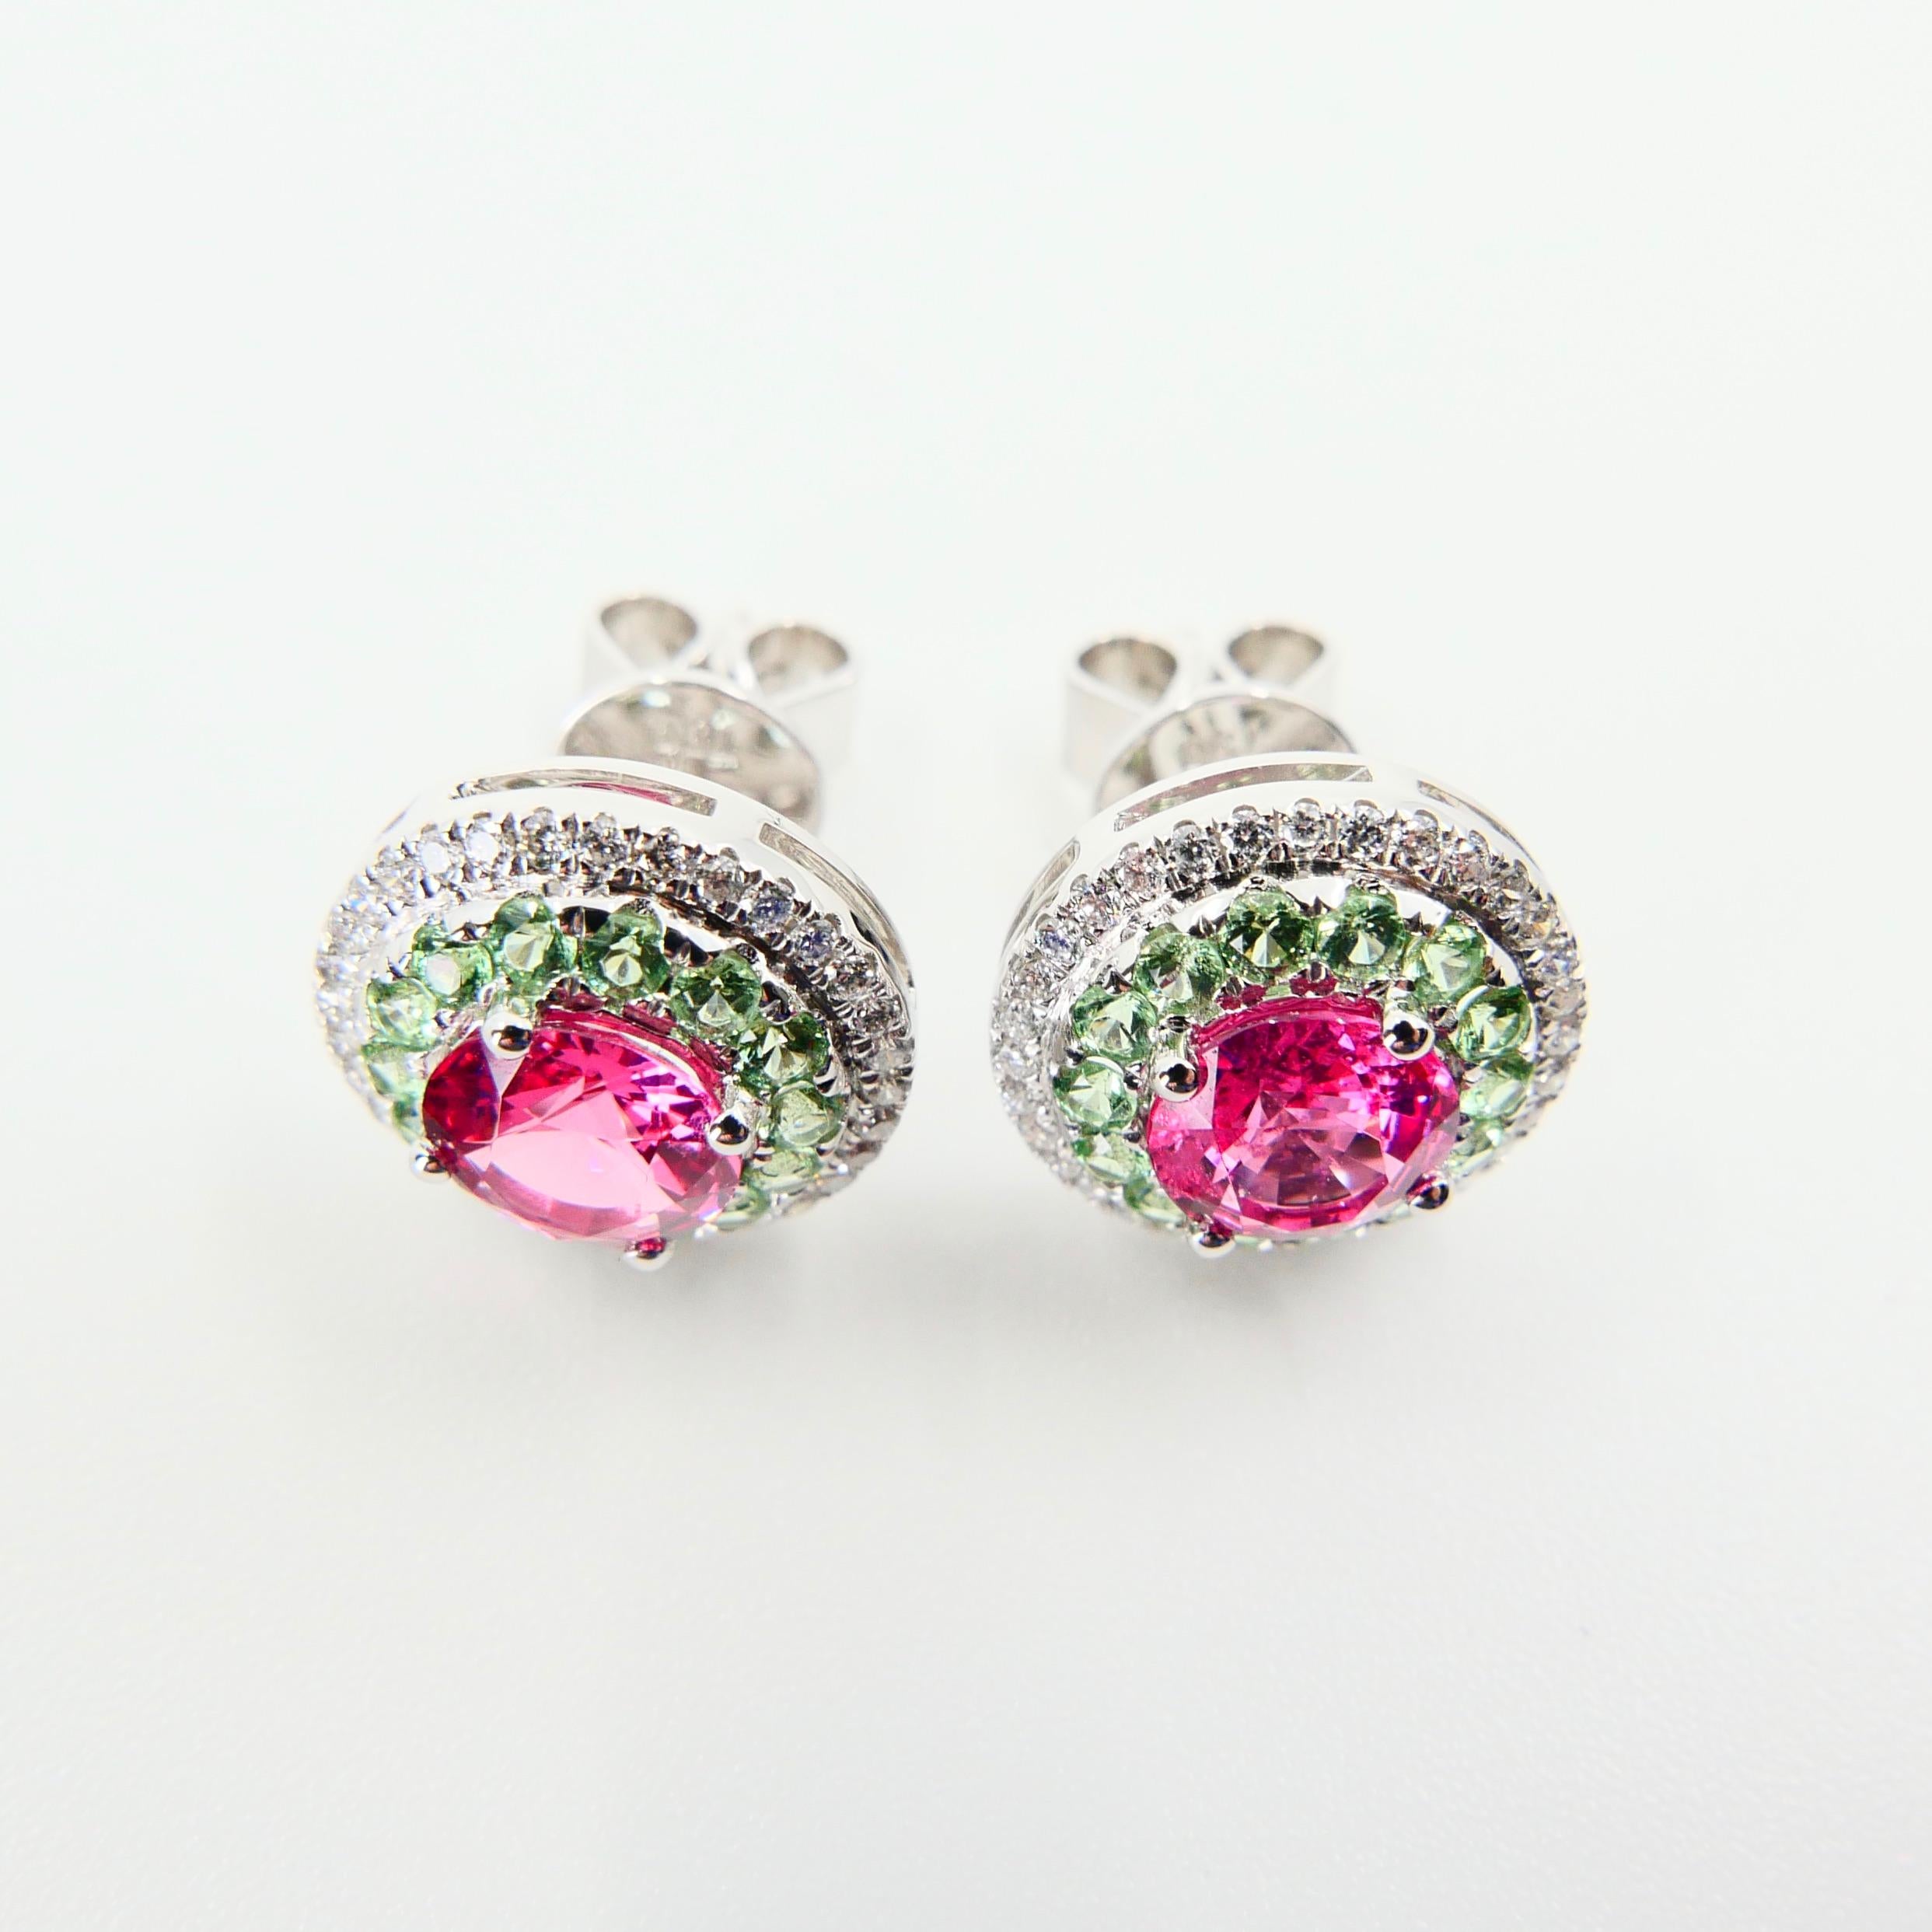 Contemporary Natural 1.53 Carat Vivid Neon Pink Spinel Peridot and Diamond Earrings, 18k Gold